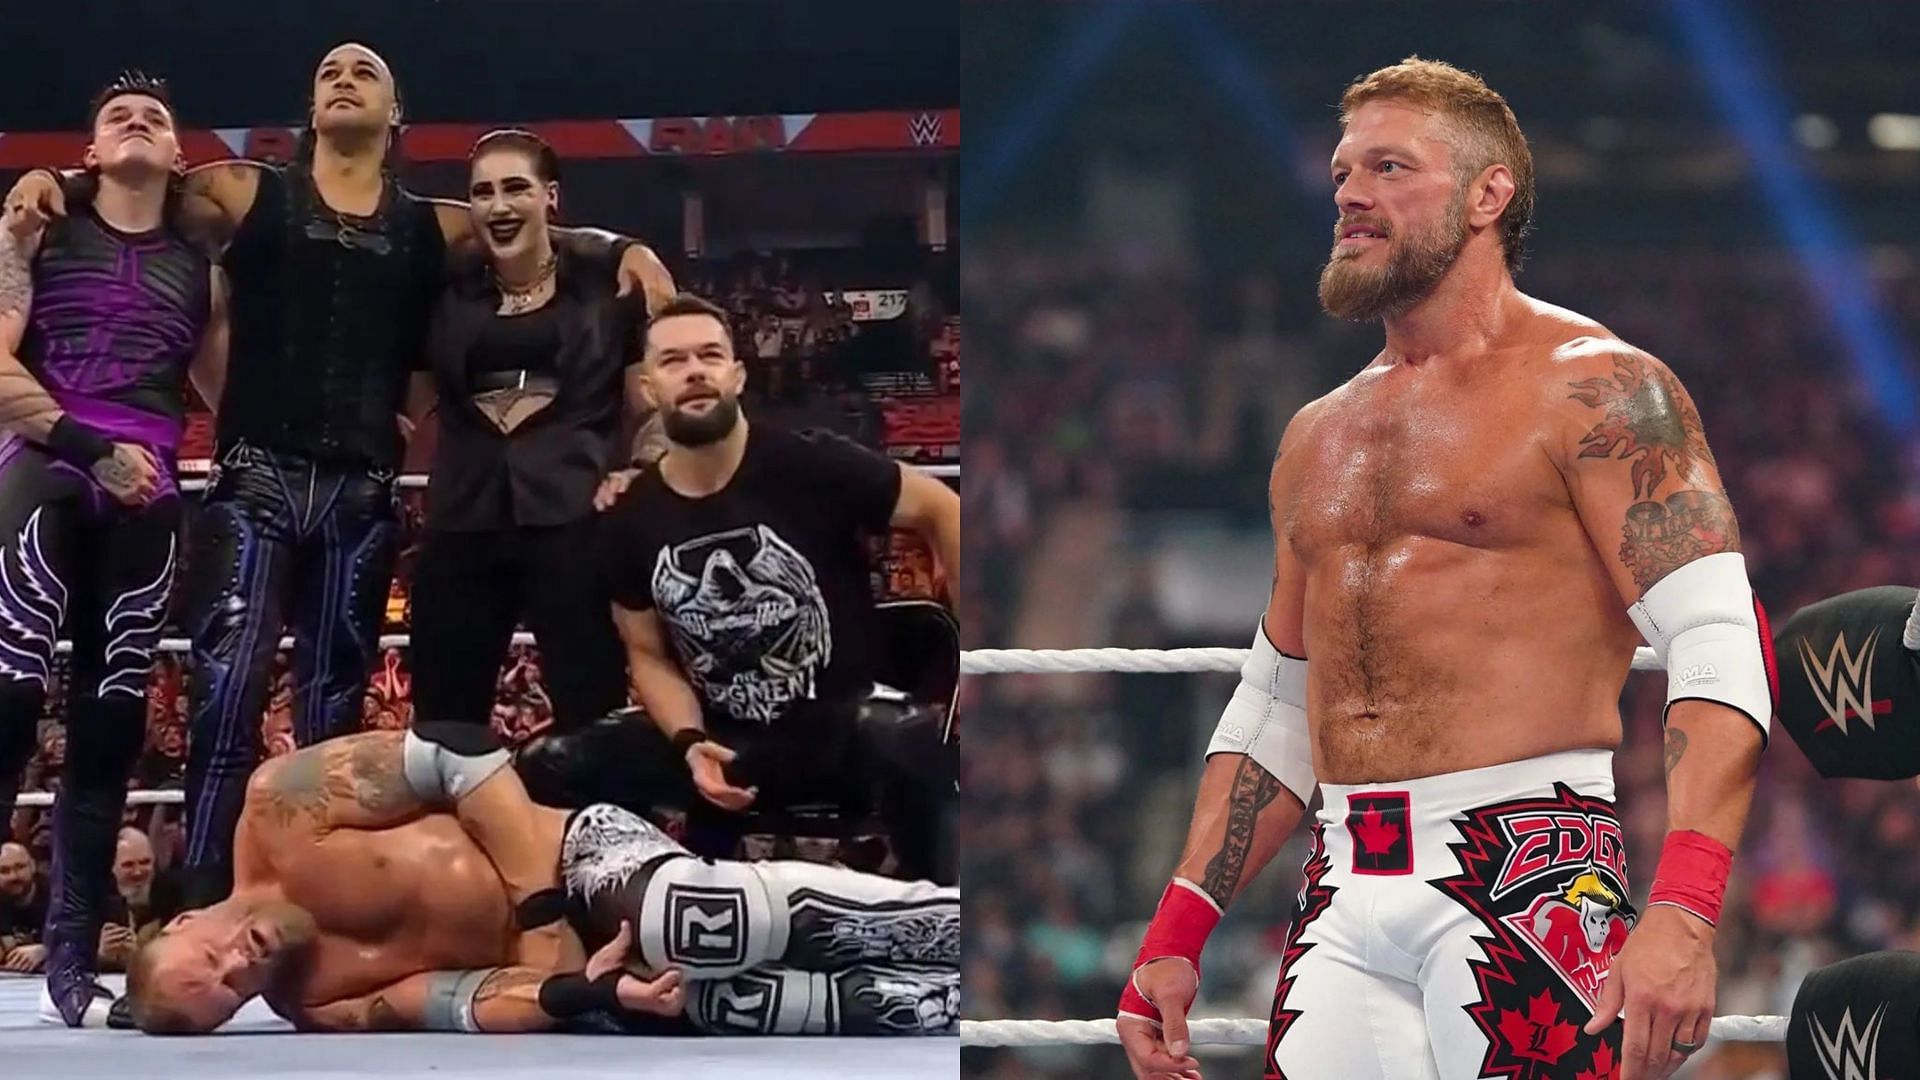 Edge will go head-to-head against Finn Balor in an I Quit Match at WWE Extreme Rules 2022